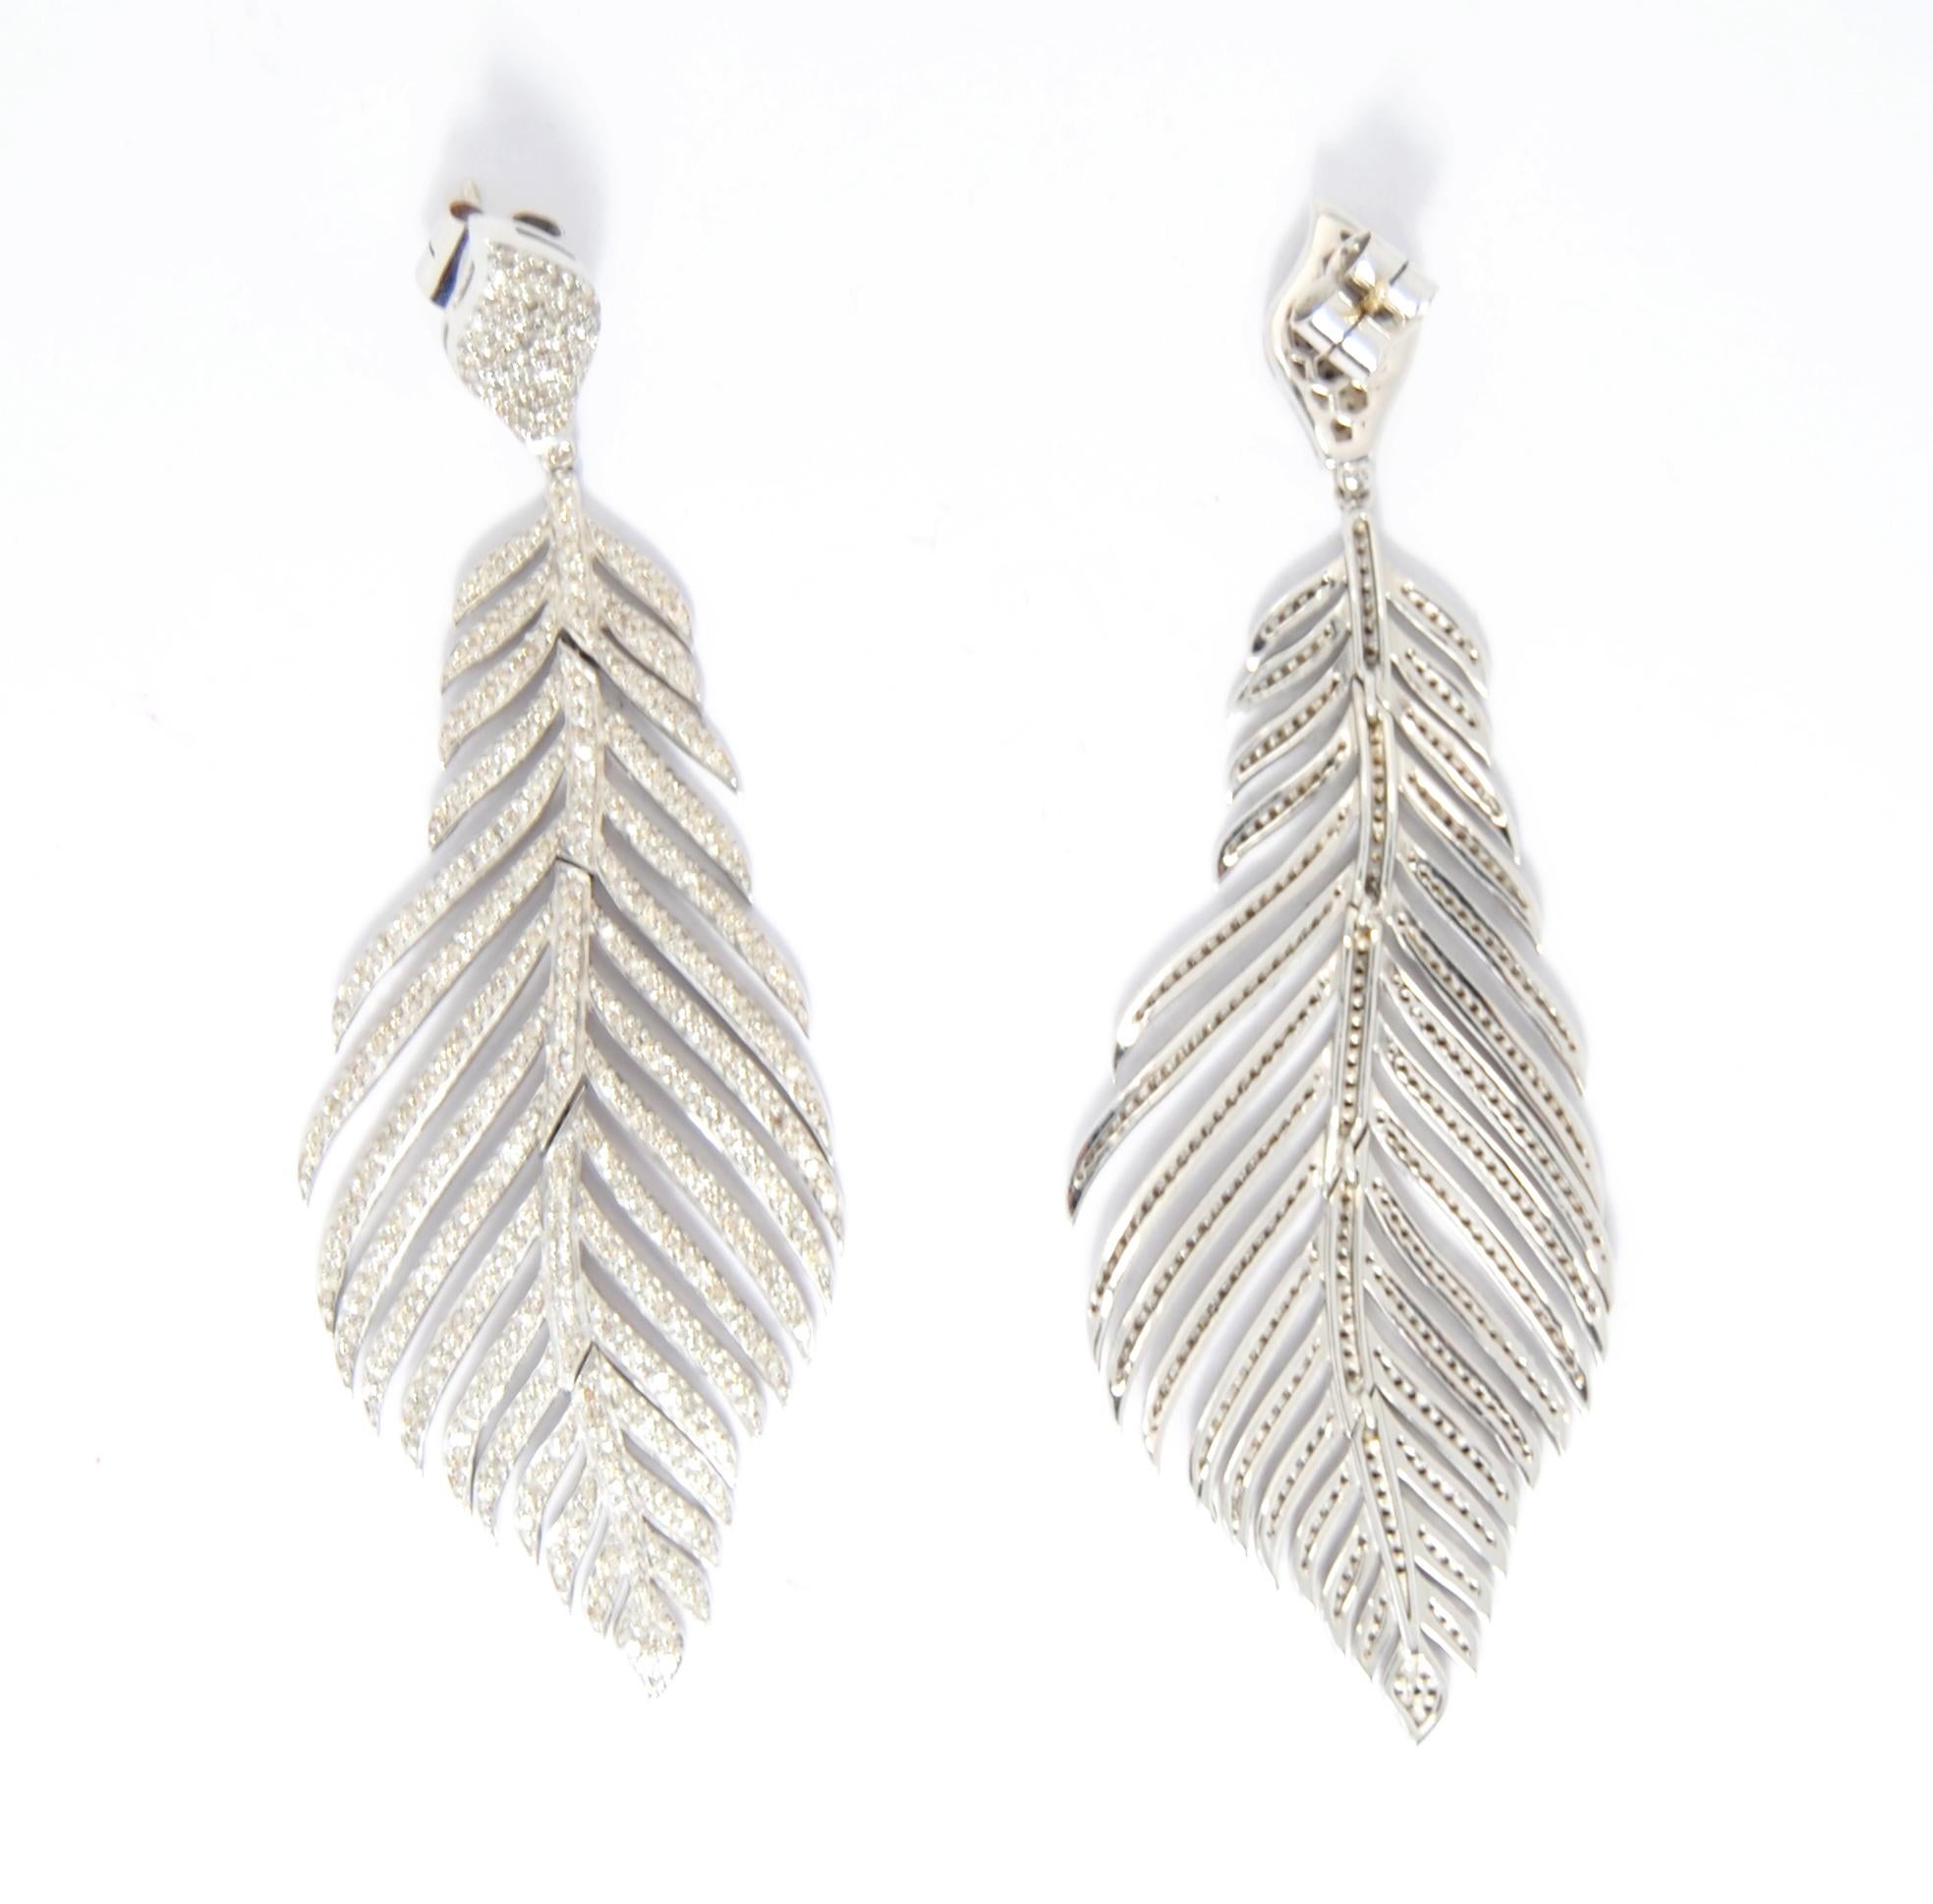 Irama Pradera is a Young designer from Spain that searches always for the best gems and combines classic with contemporary mounting and styles. 
Sleekly crafted in 18K white gold and silver  these classic roman leaf motif mounted with 932 pavé